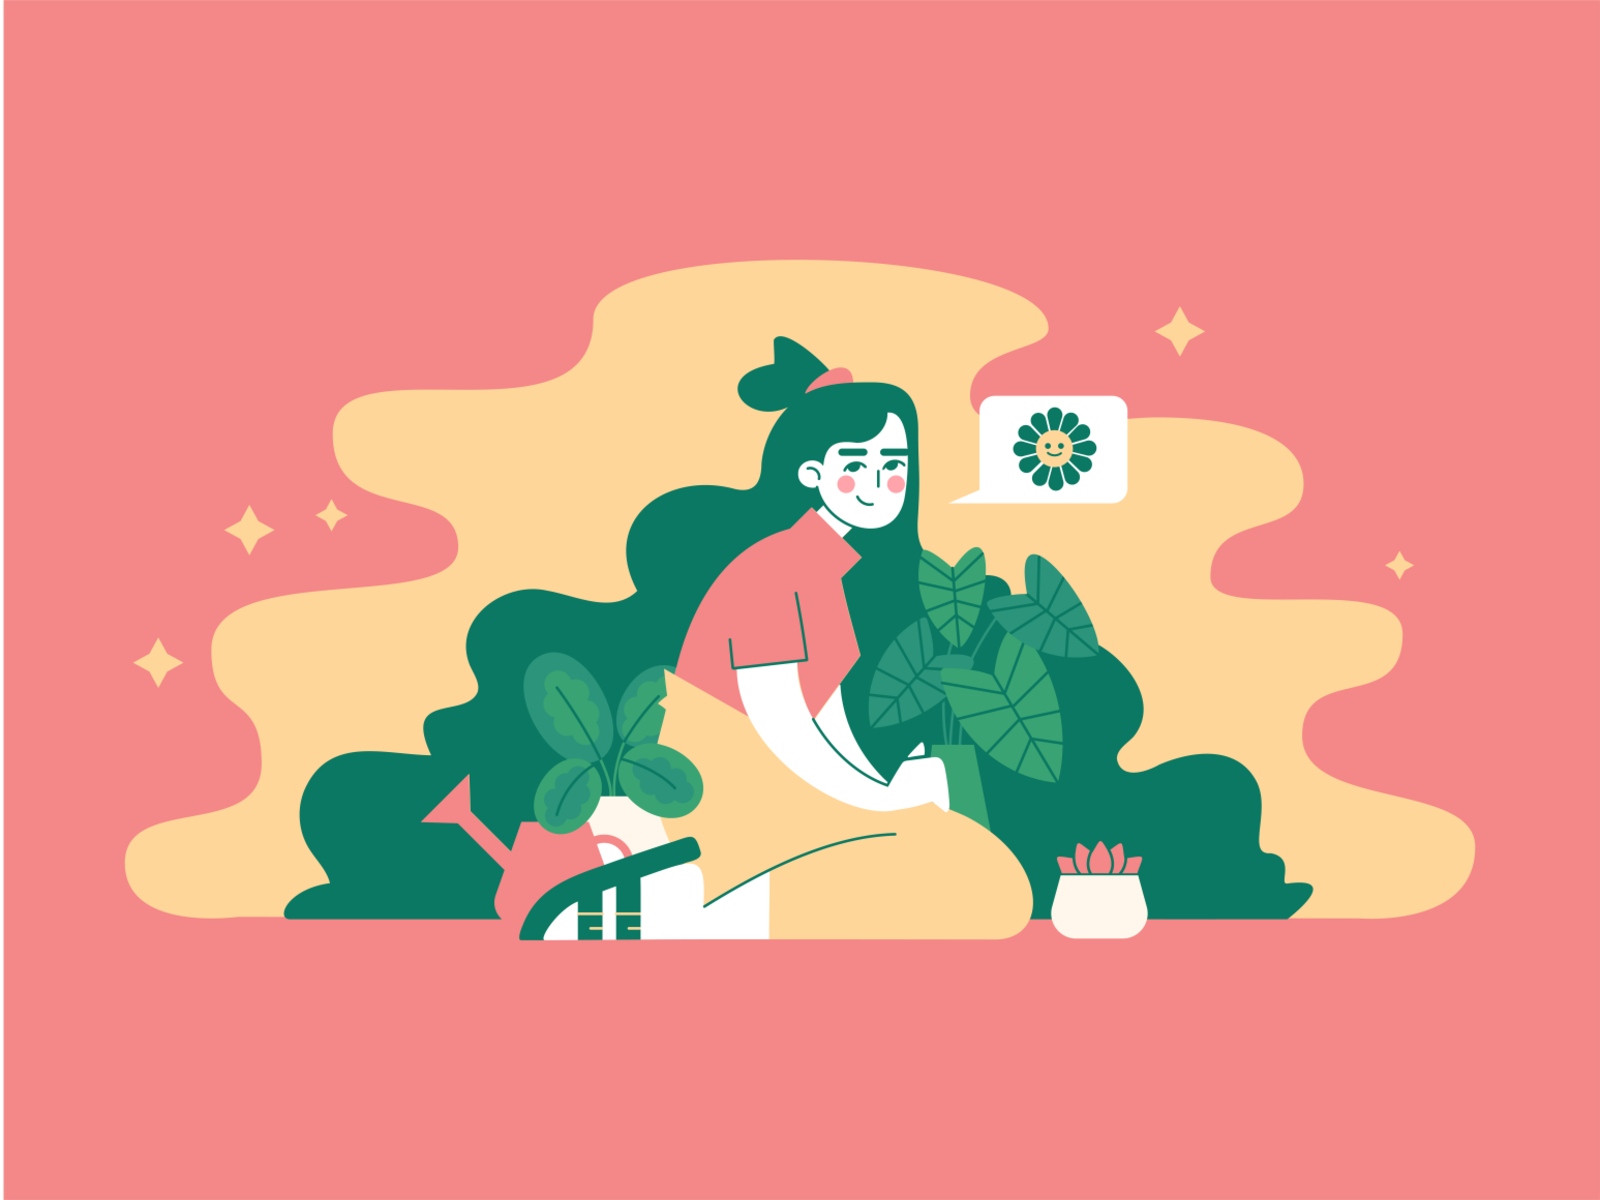 Plants are friends by Carol Carretto on Dribbble